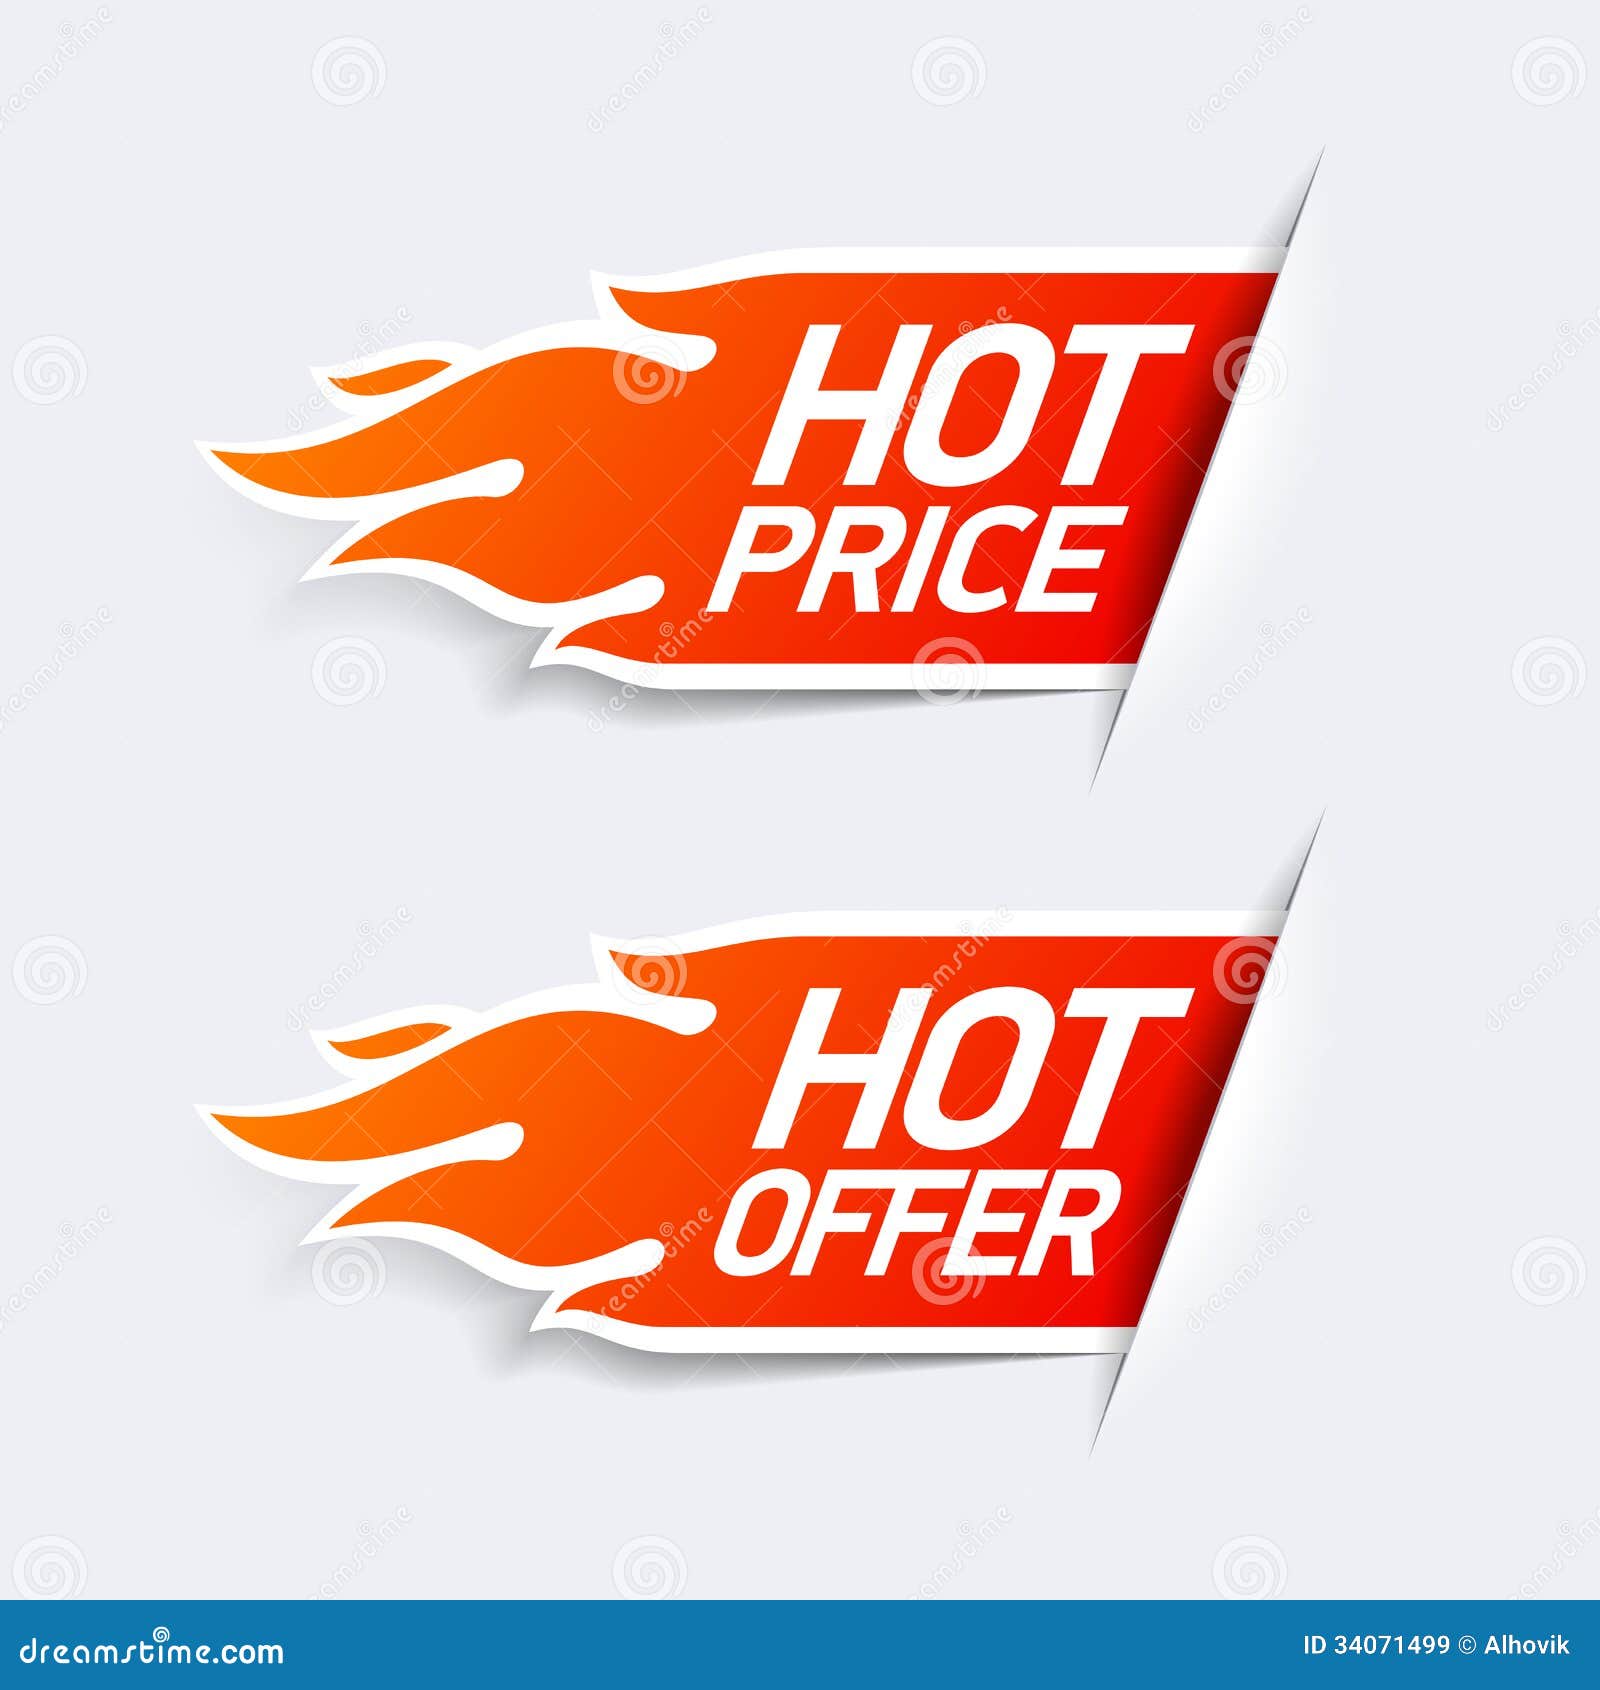 hot price and hot offer s